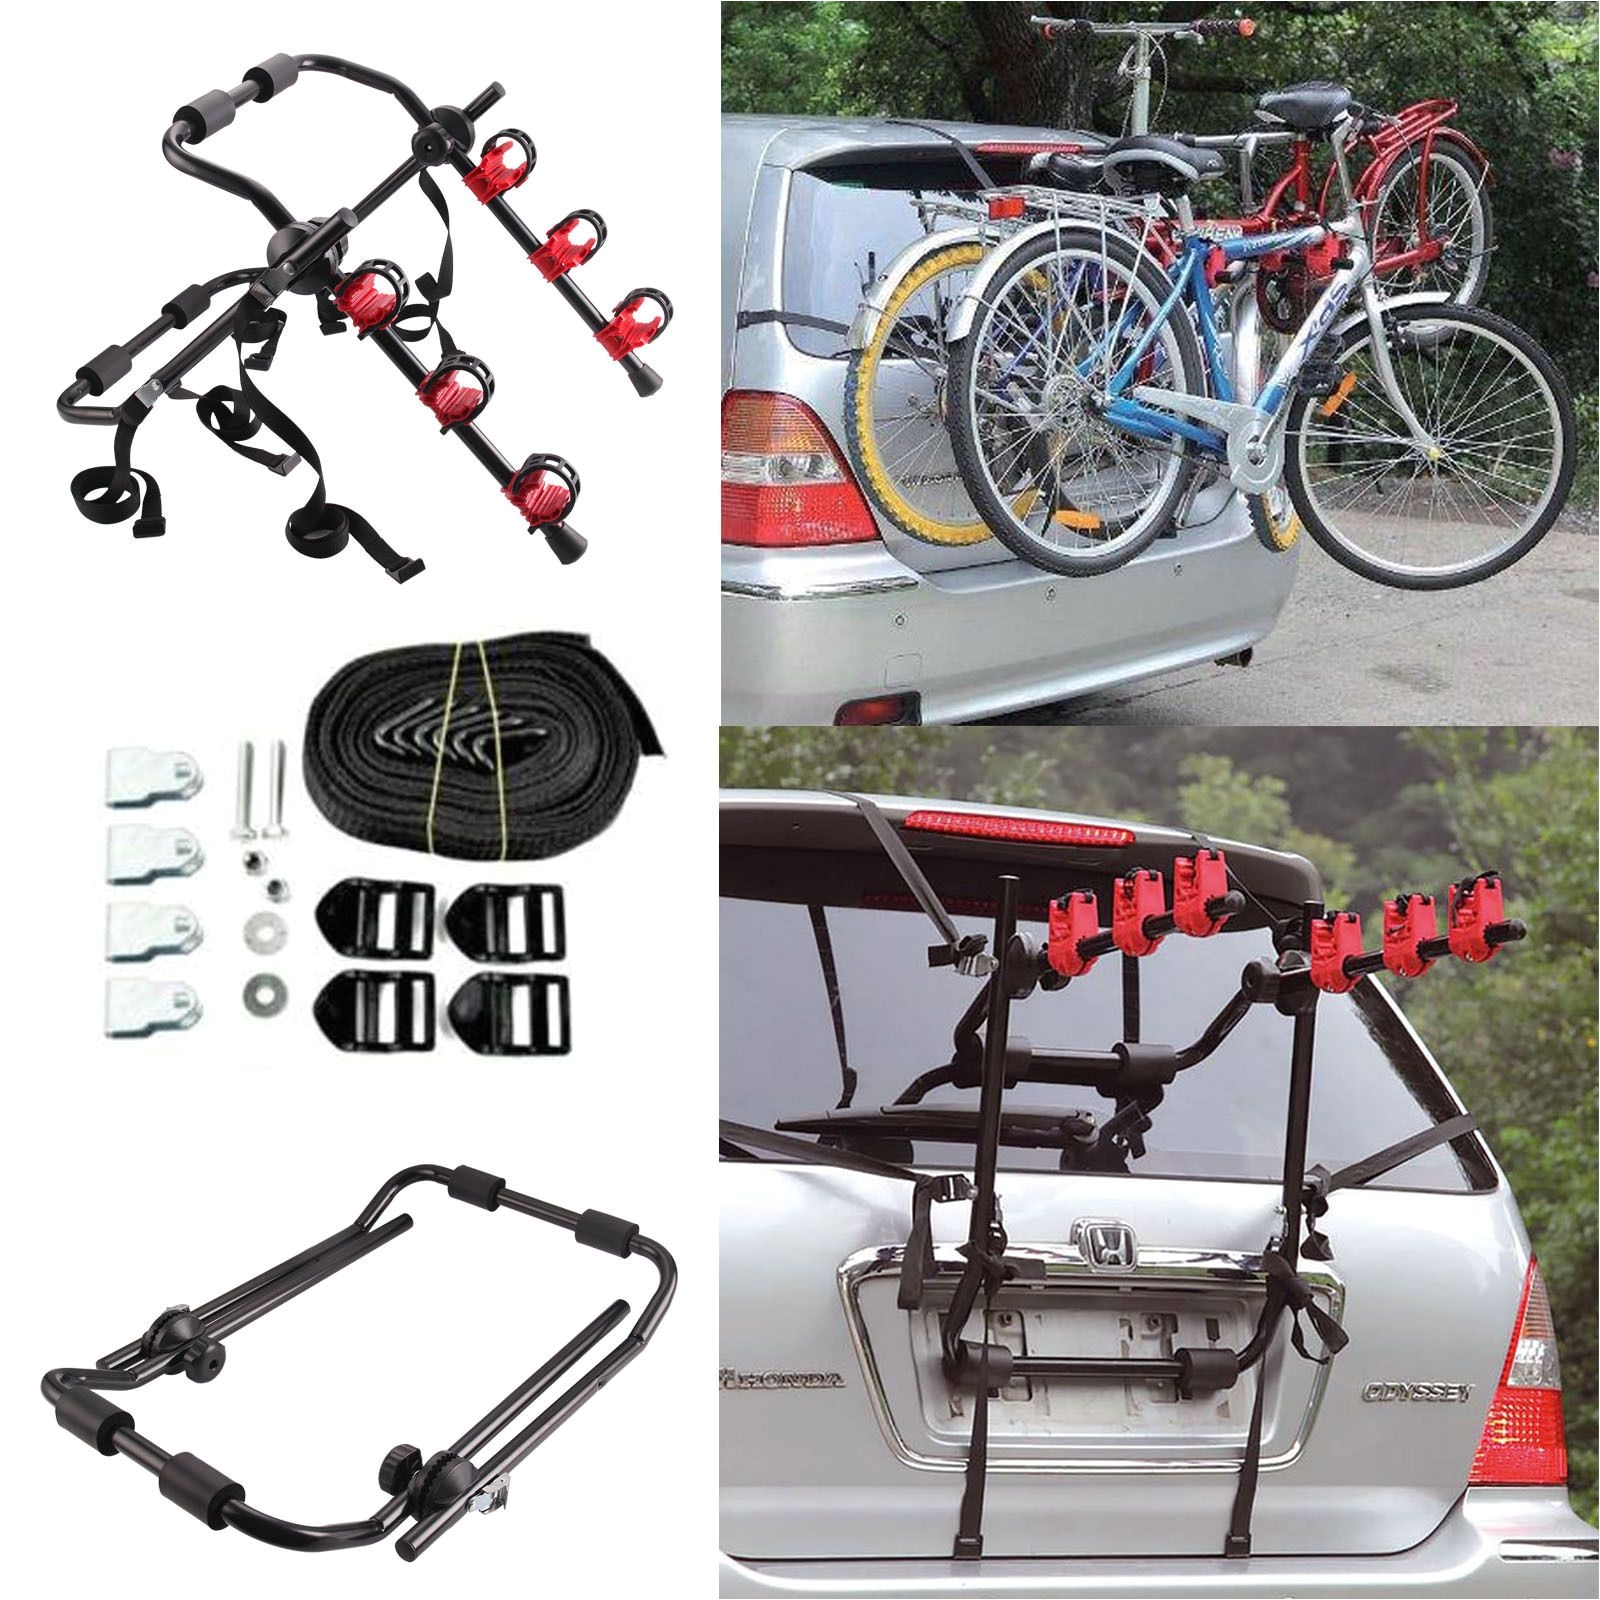 genuine bmw cycle carrier for roof rack 82720137716 oem bike bars view more on the link http www zeppy io product gb 2 141965925484 bmw